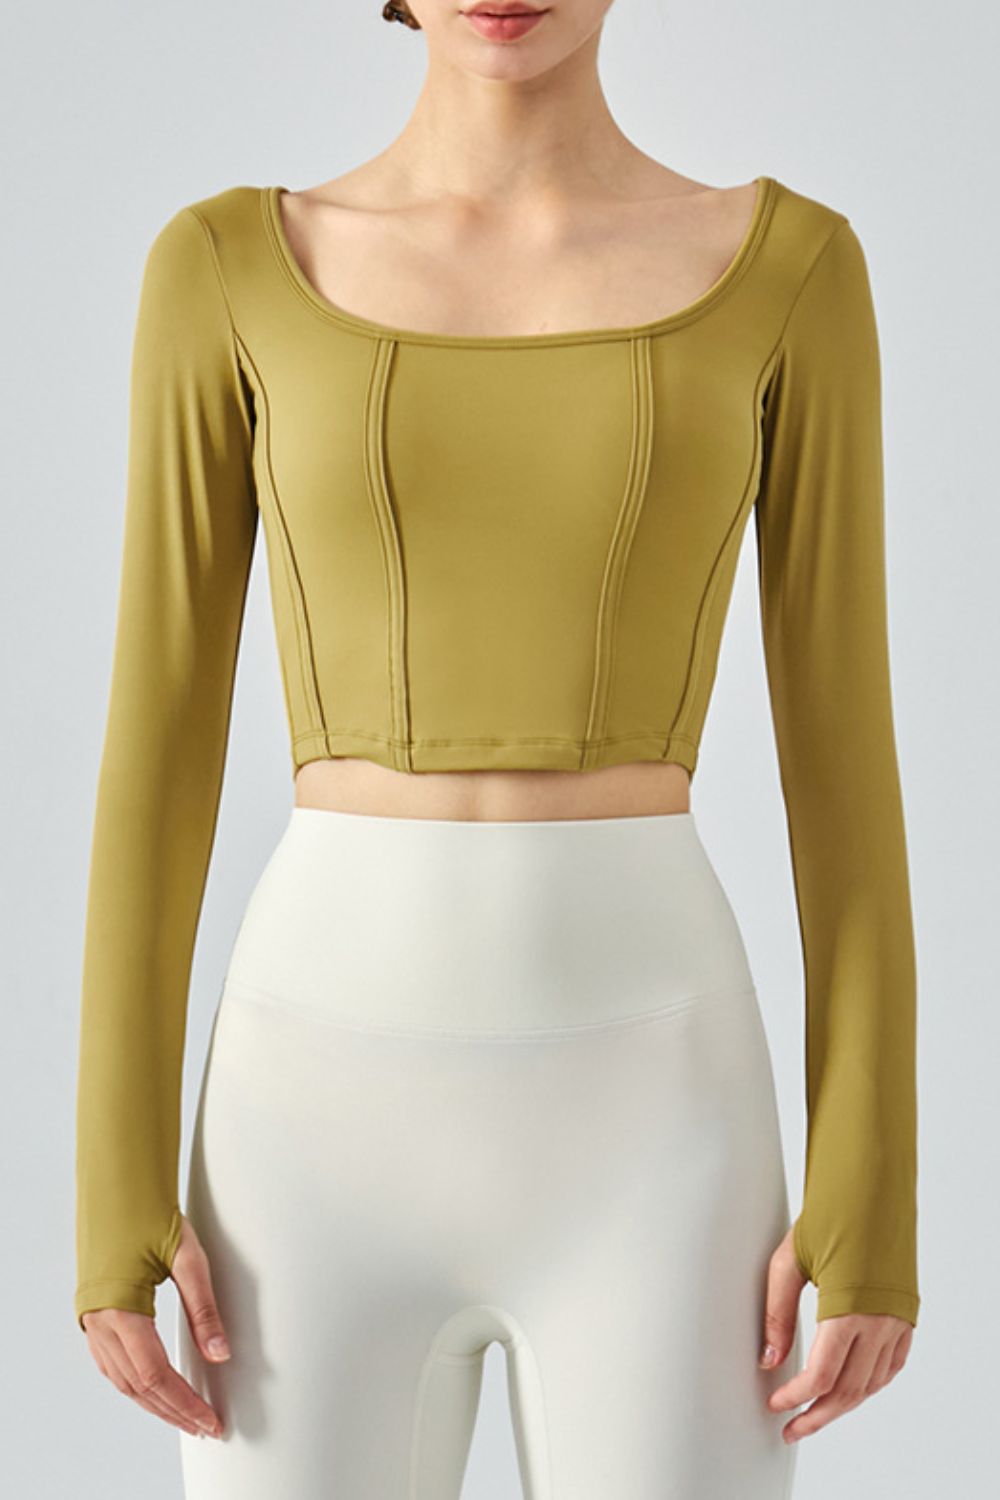 Seam Detail Thumbhole Sleeve Cropped Sports Top - Crop Tops & Tank Tops - FITGGINS